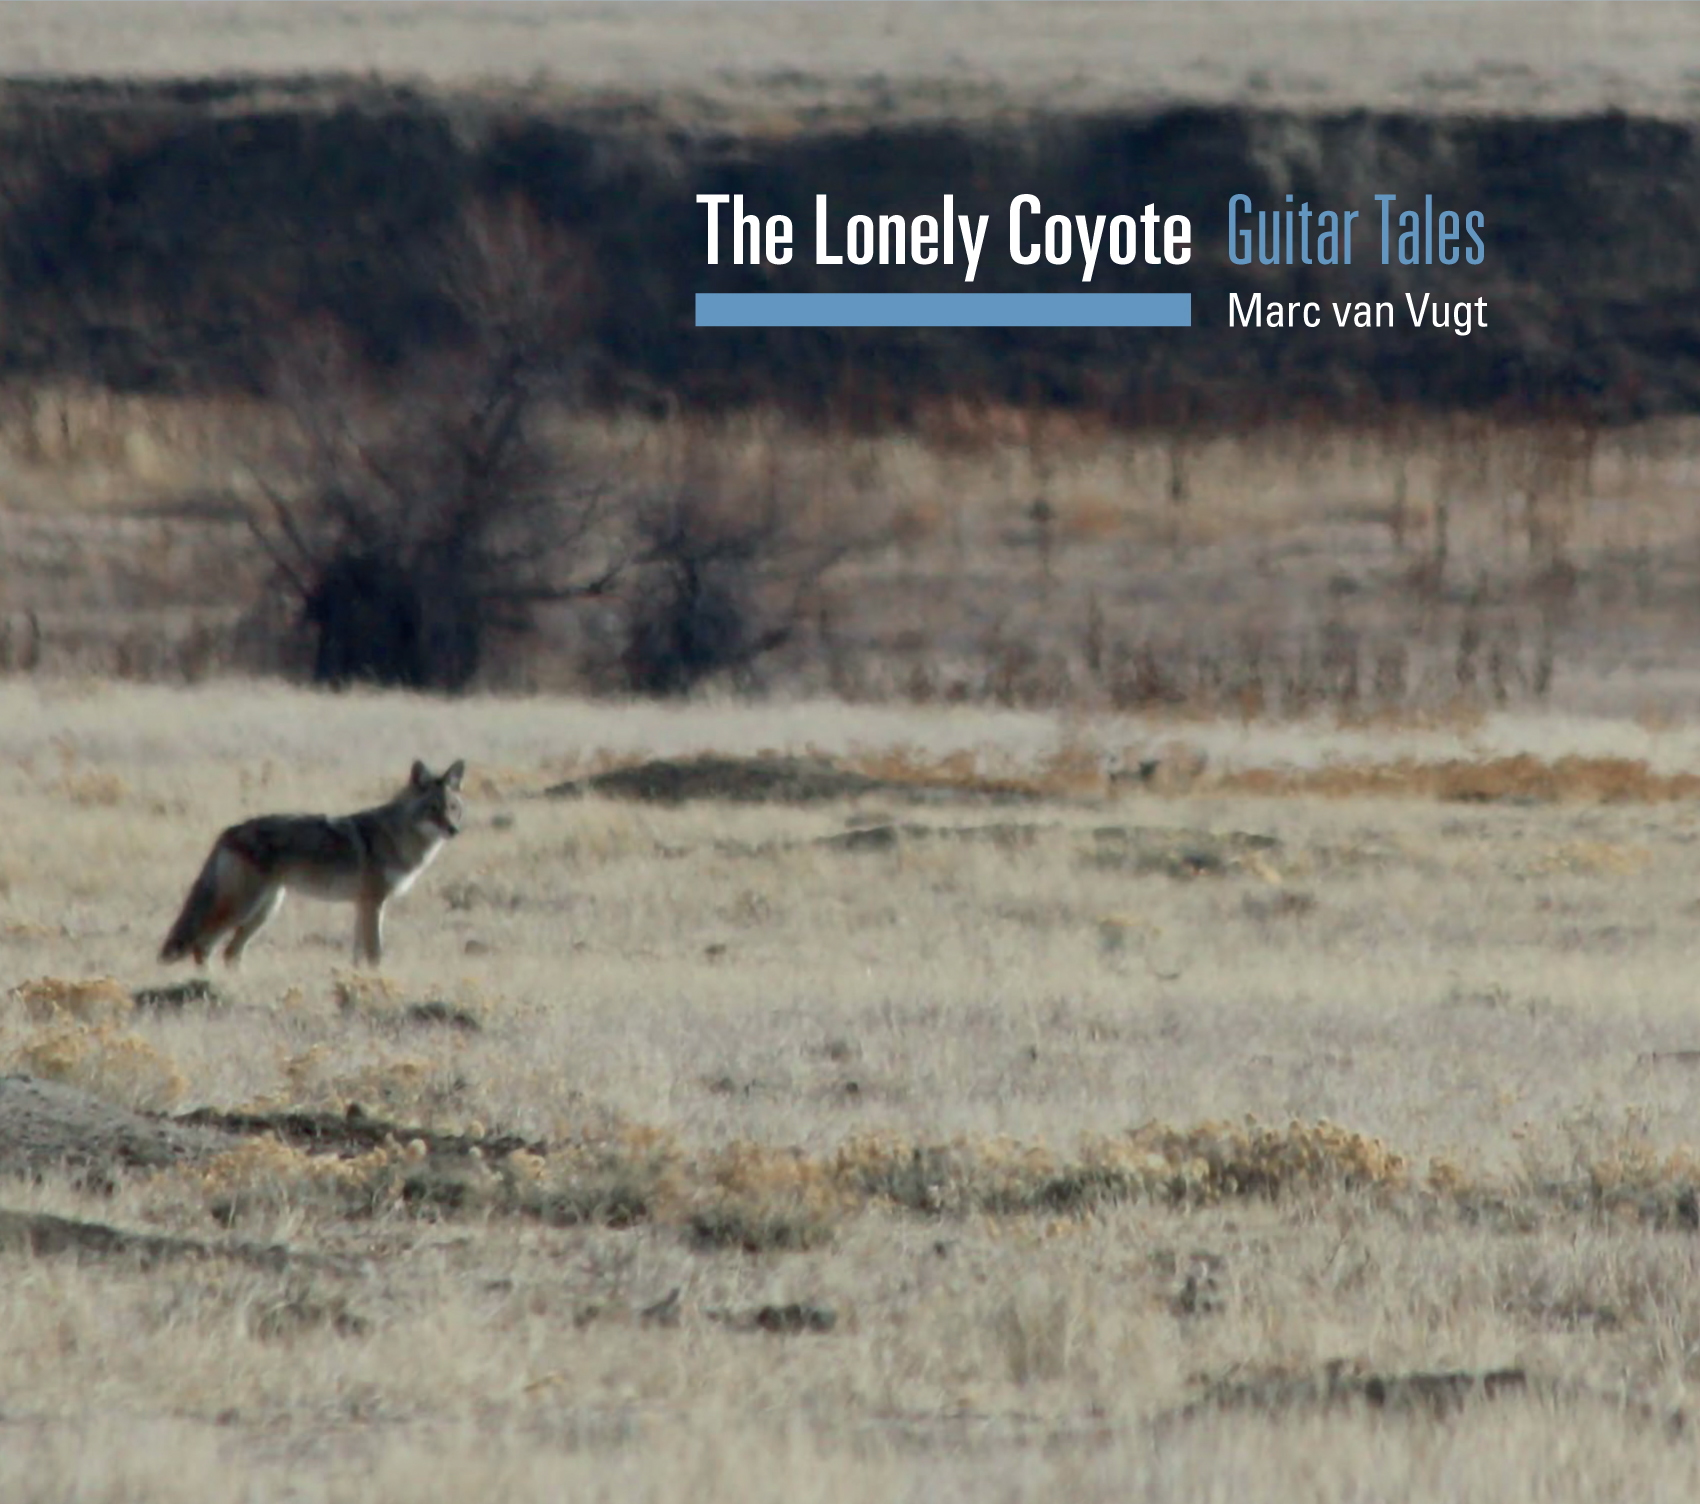 Marc van Vugt
The Lonely Coyote